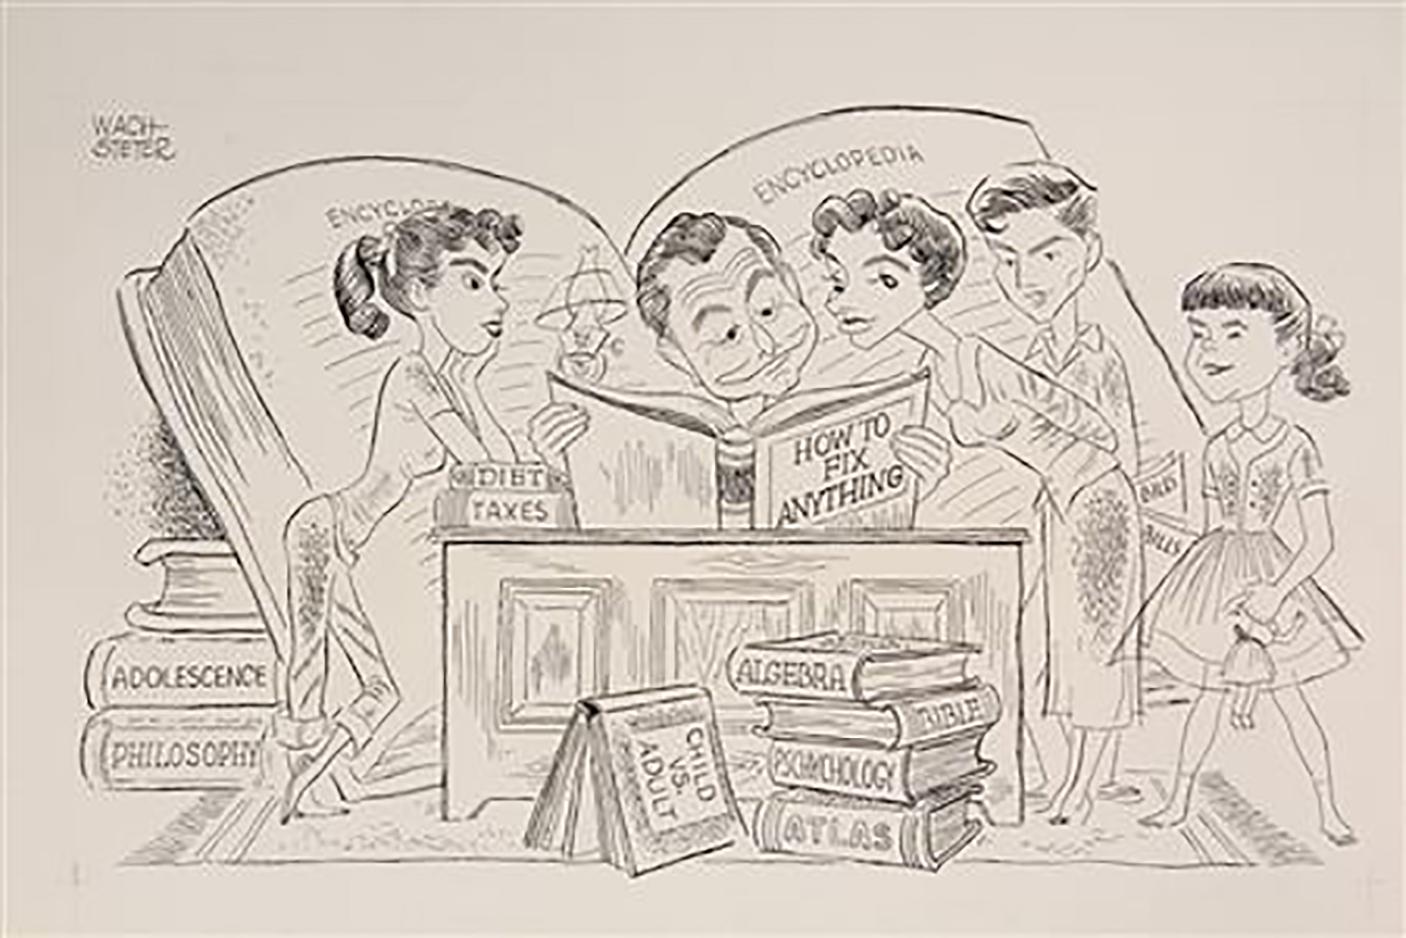 George Wachsteter Figurative Art -  "Father Knows Best" on NBC-TV, Oct. 3, 1954 debut